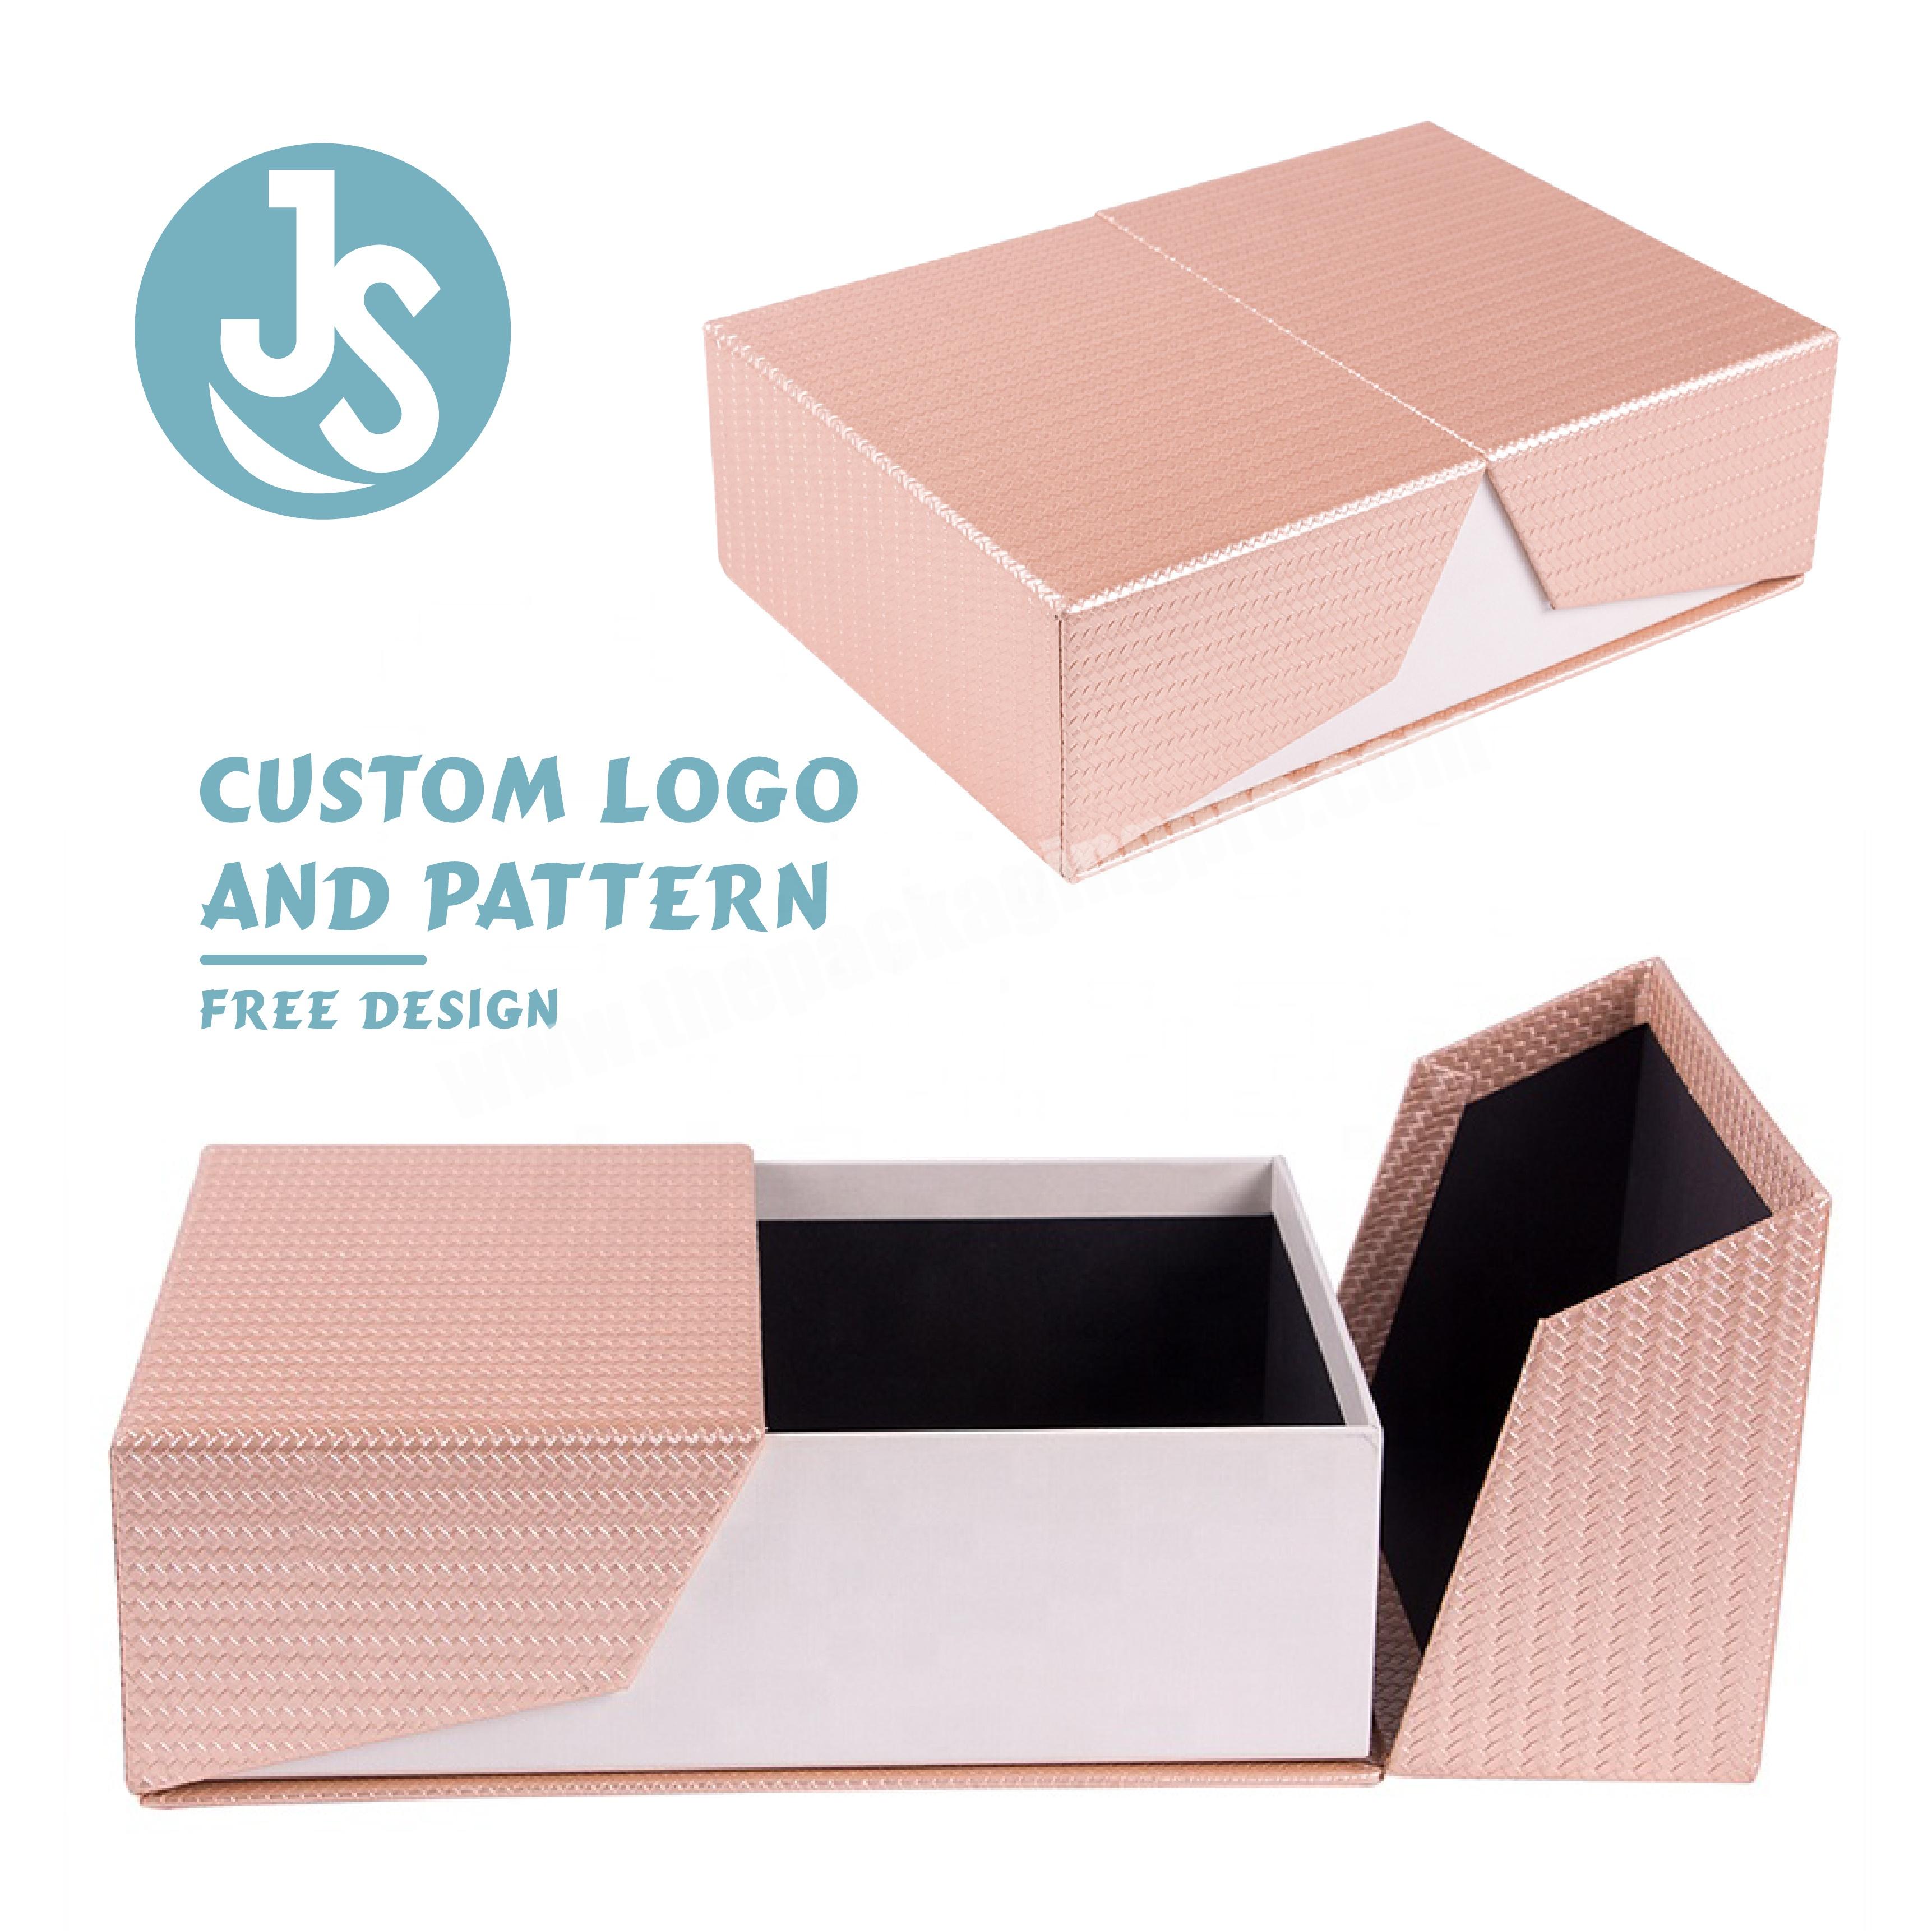 Customized Double Door Open Paper Box Packaging Wholesale Apparel Clothing Packaging Rigid Boxes Luxury gift box